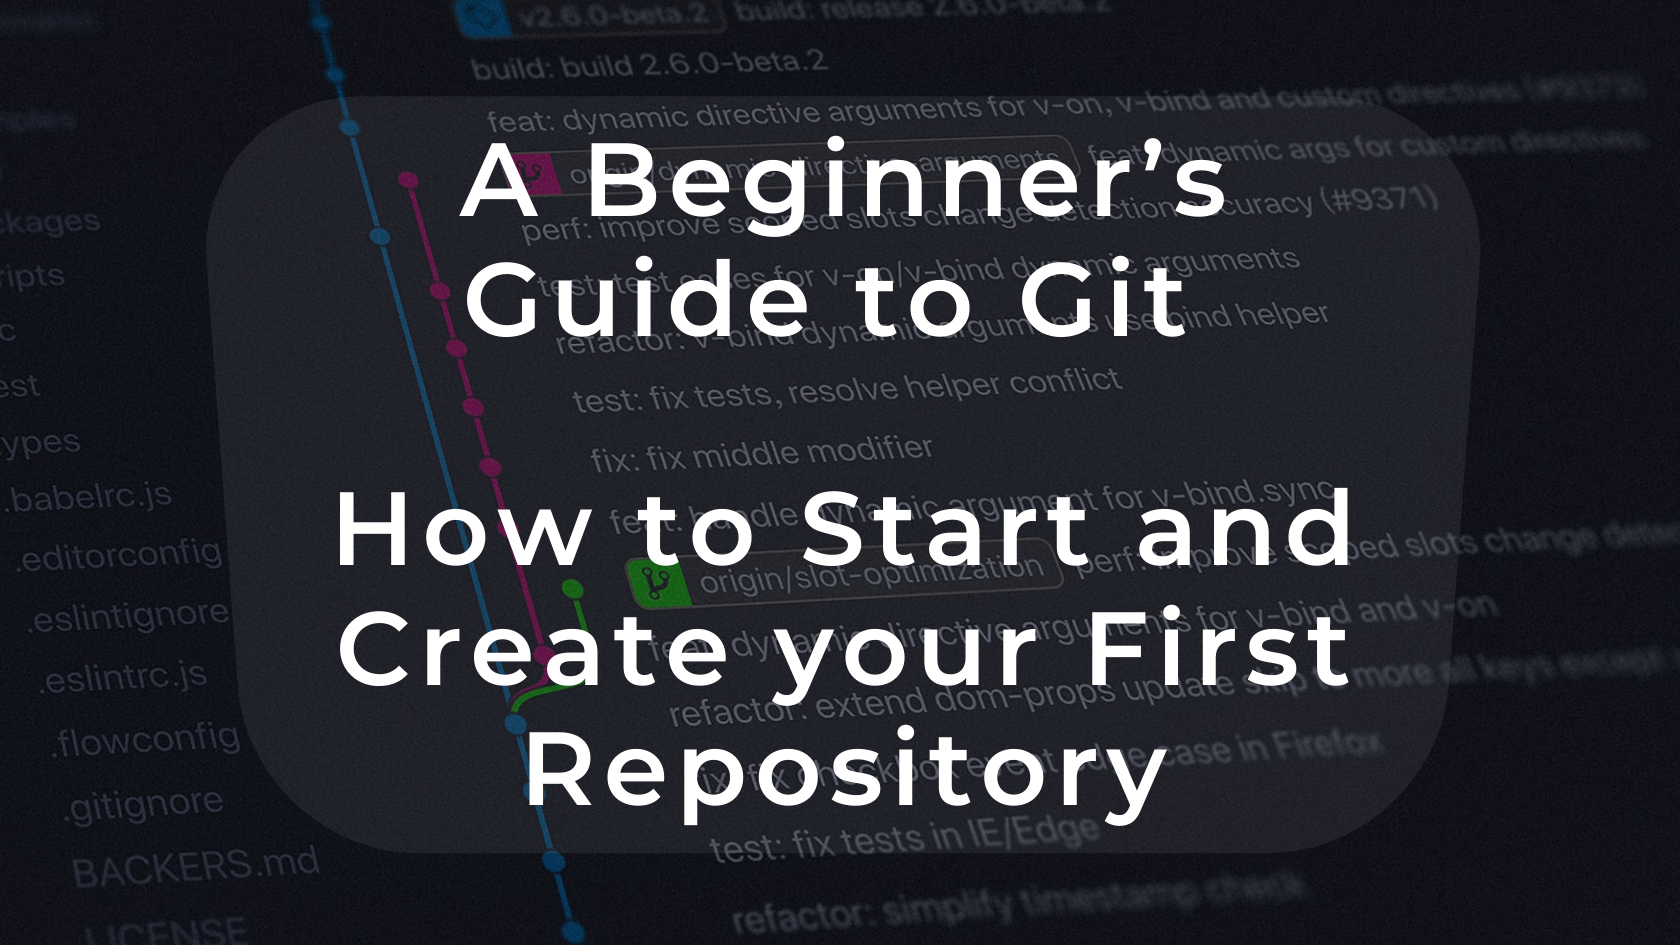 A Beginner’s Guide to Git — How to Start and Create your First Repository